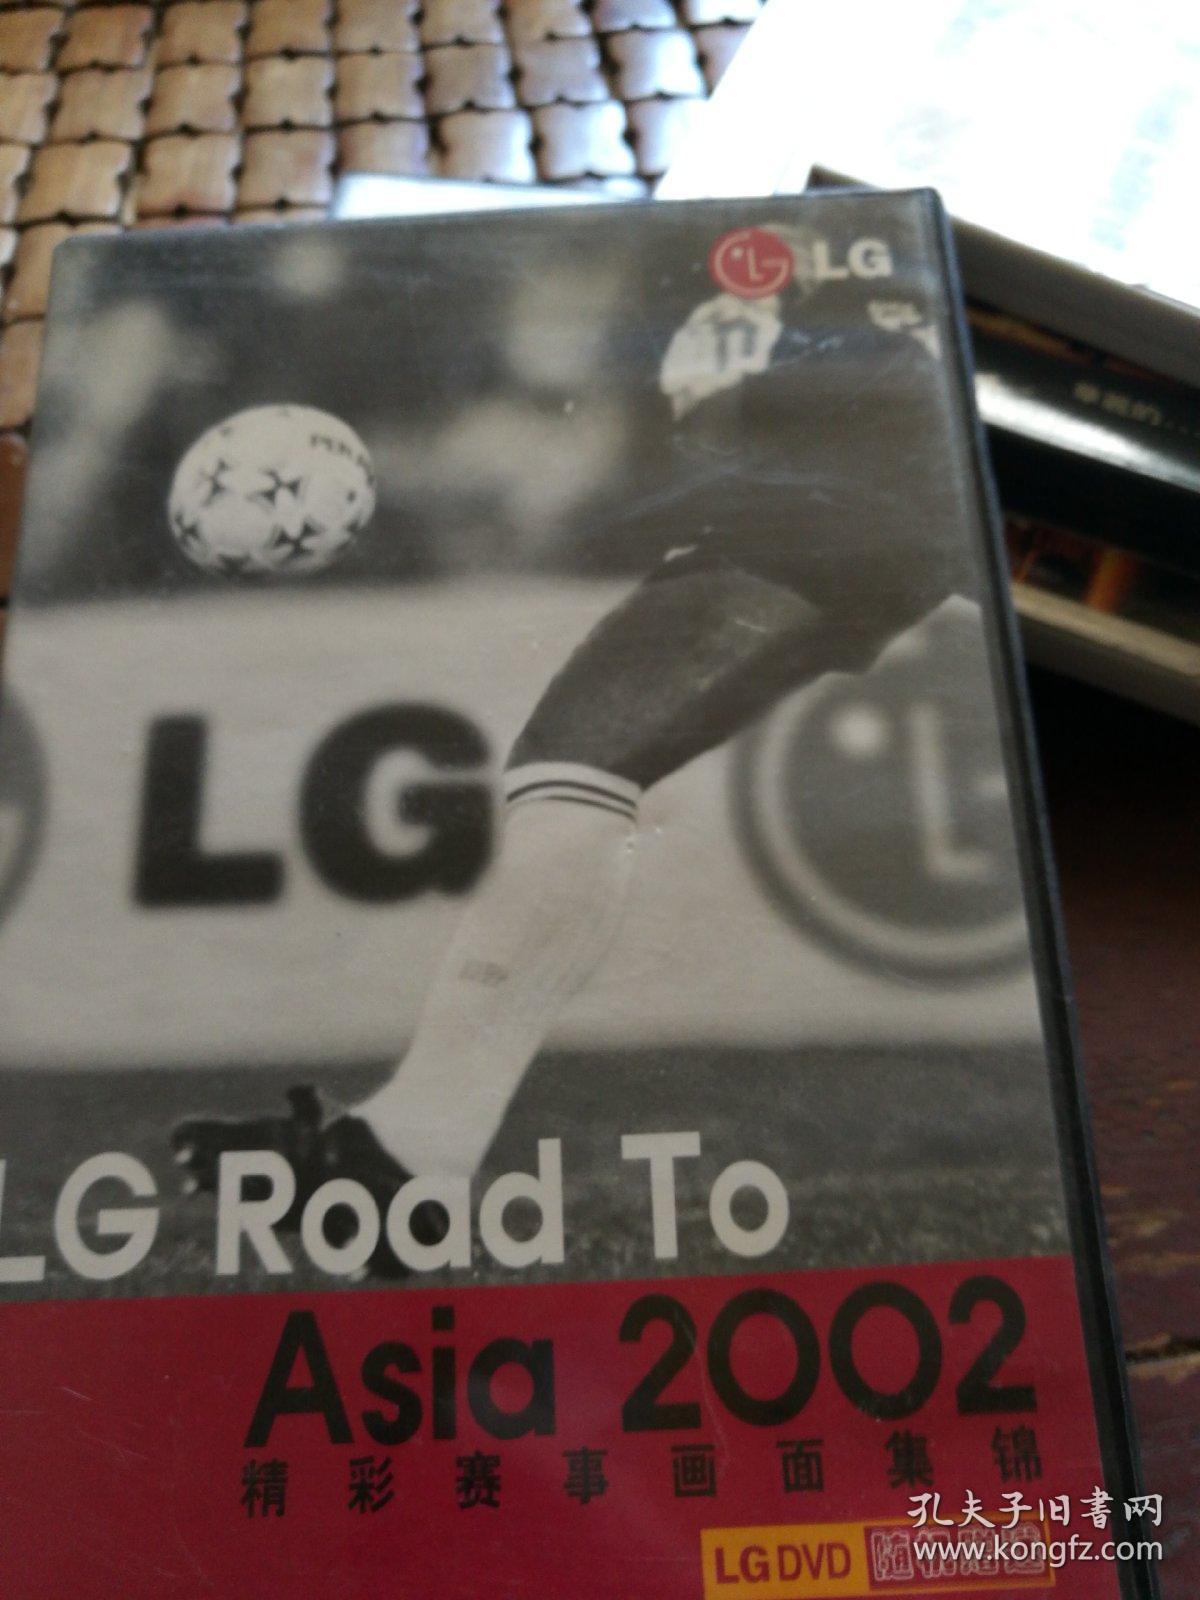 LG ROAD TO ASIA2002精彩赛事画面集锦DVD